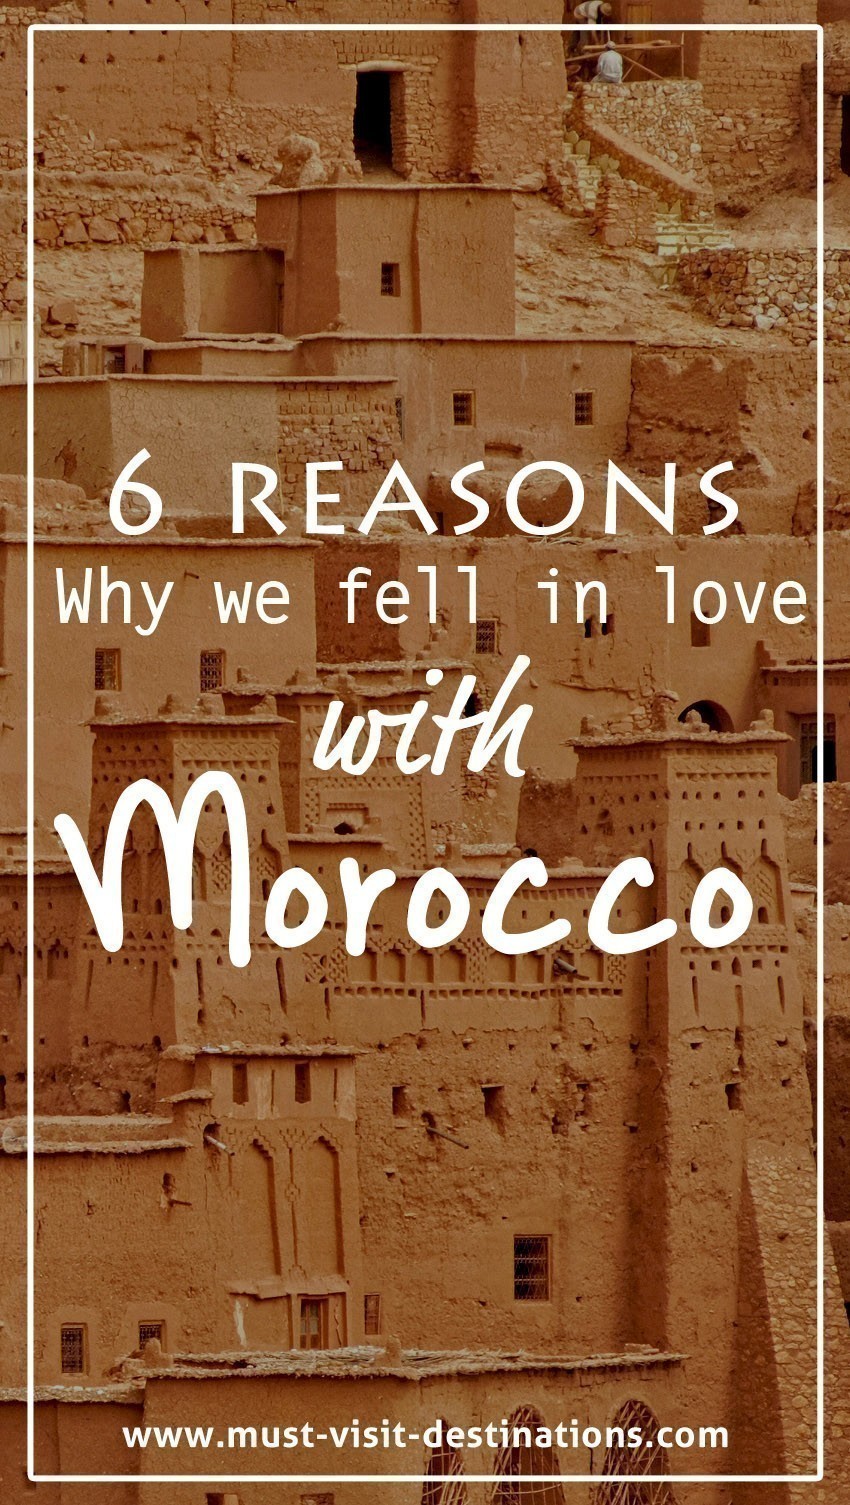 6 Reasons Why we fell in love with Morocco #travel #morocco